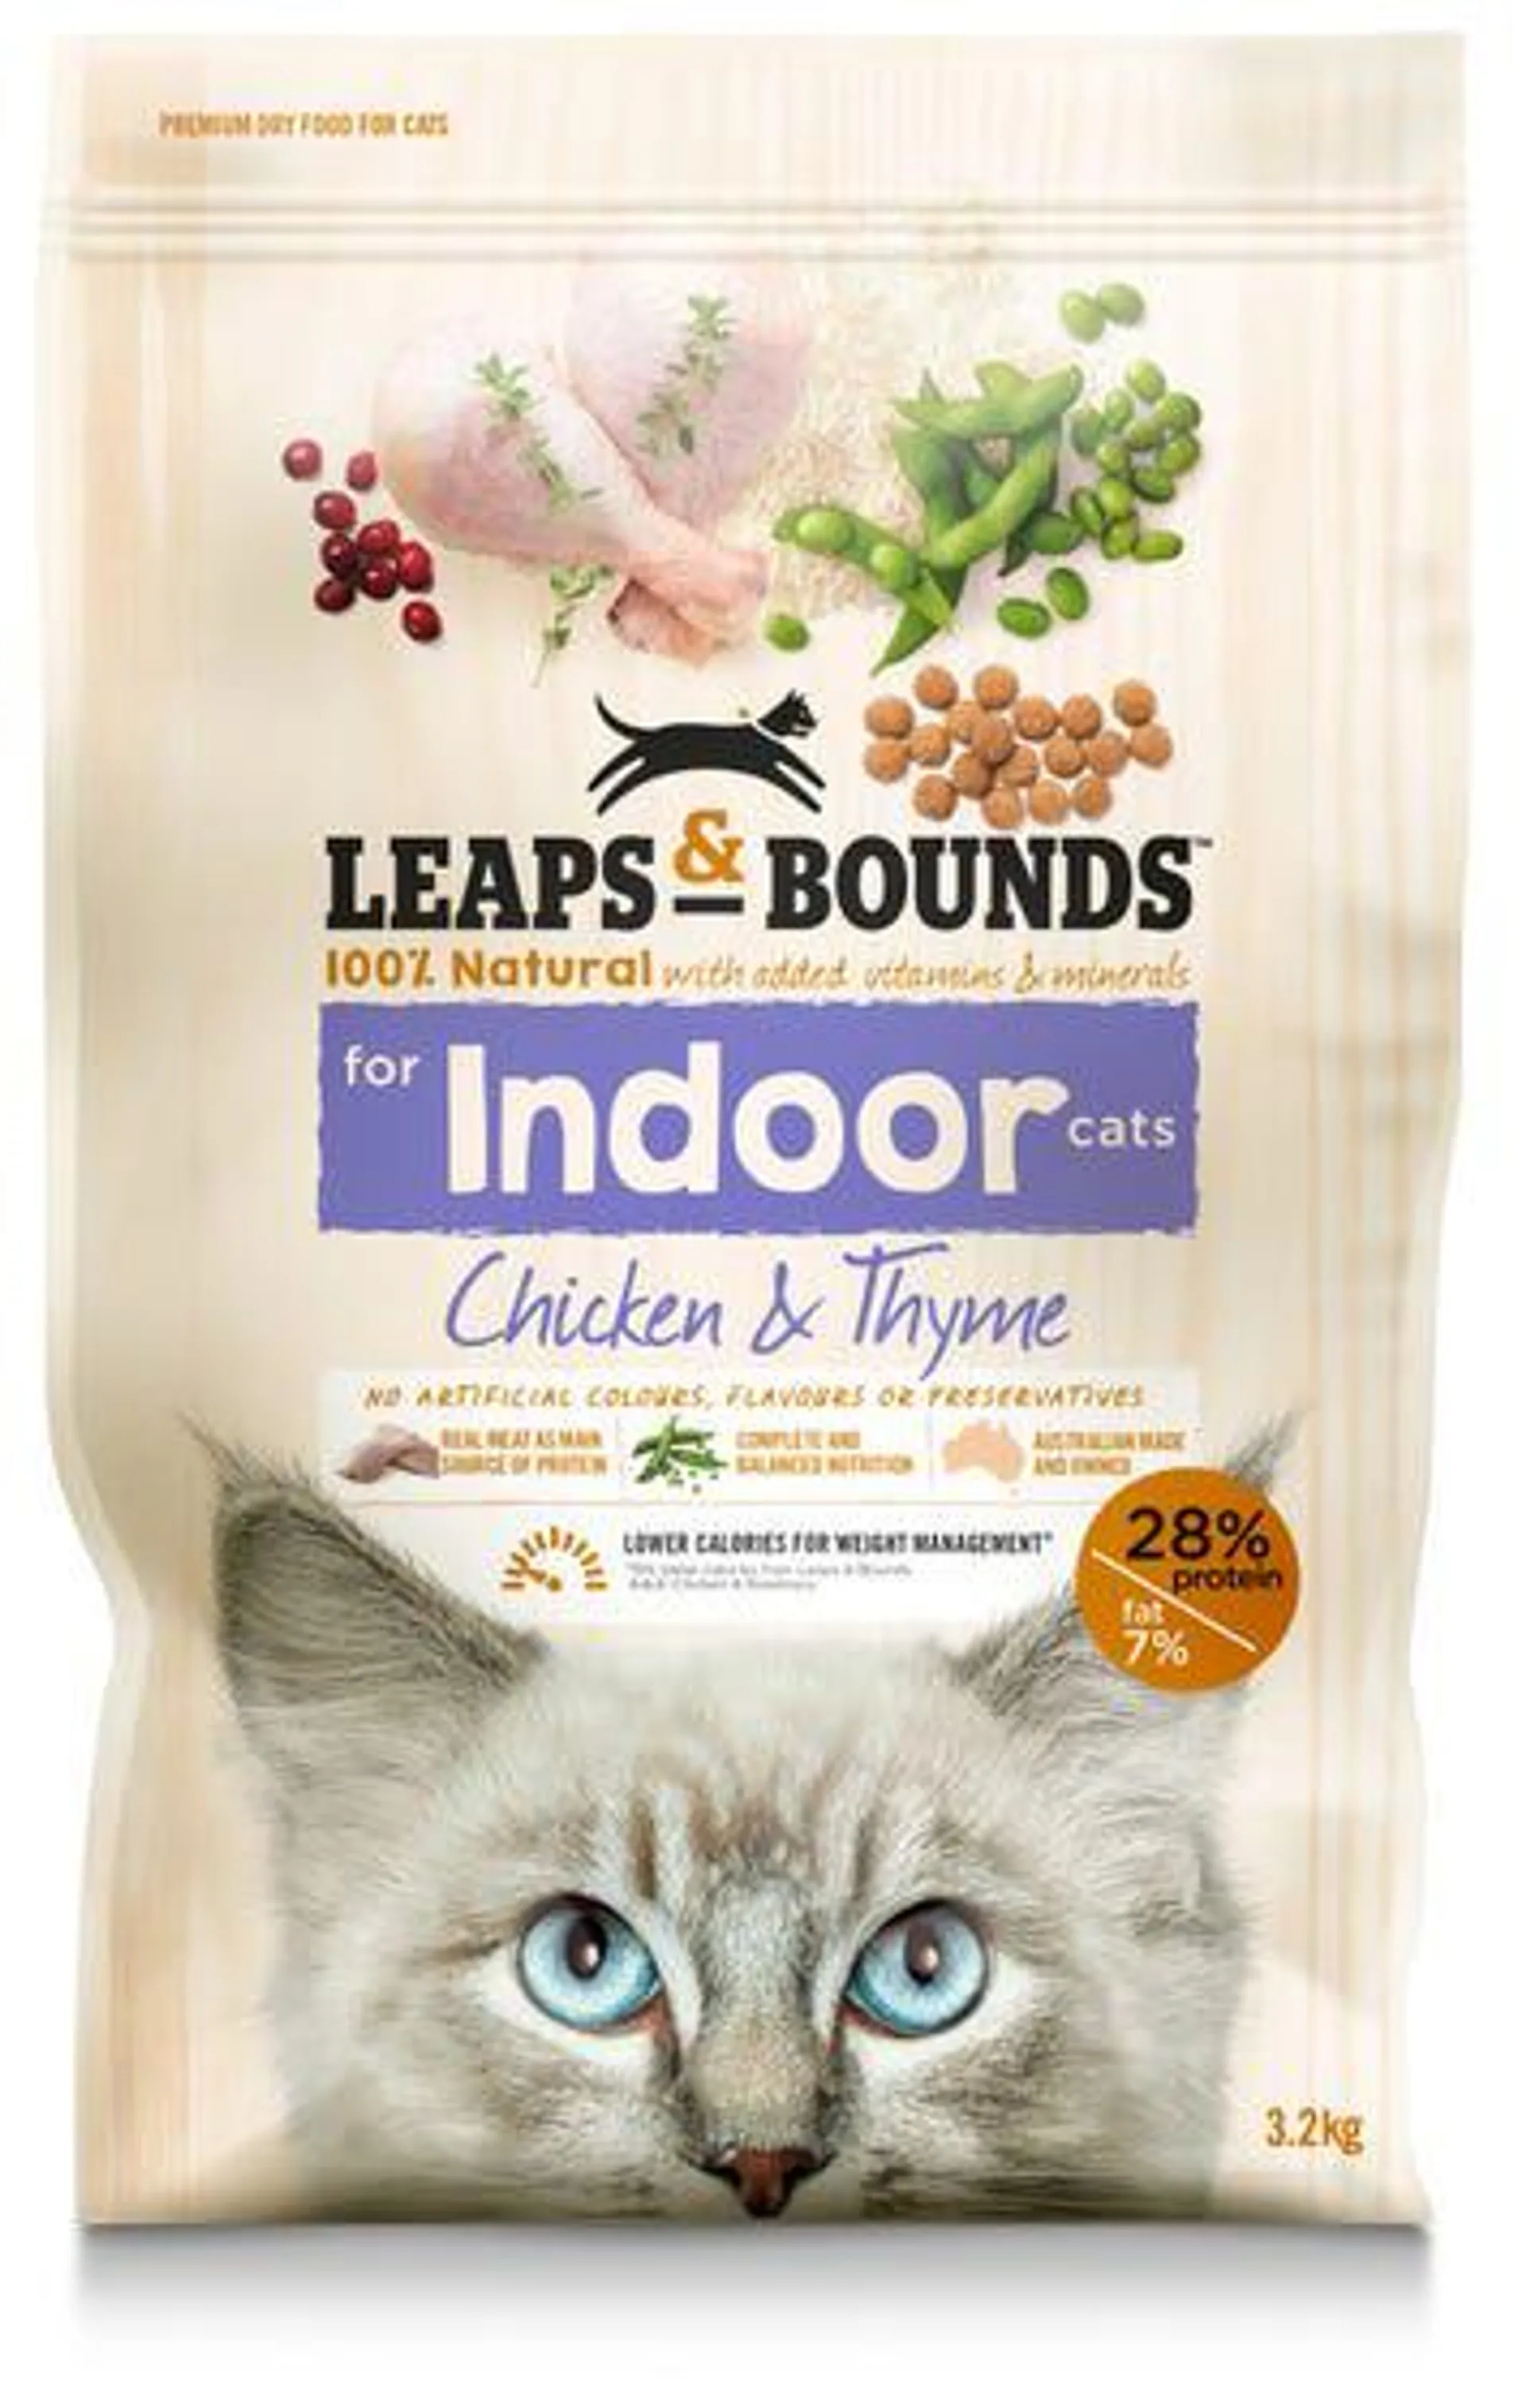 Leaps & Bounds Chicken And Thyme Indoor Cat Food 3.2kg